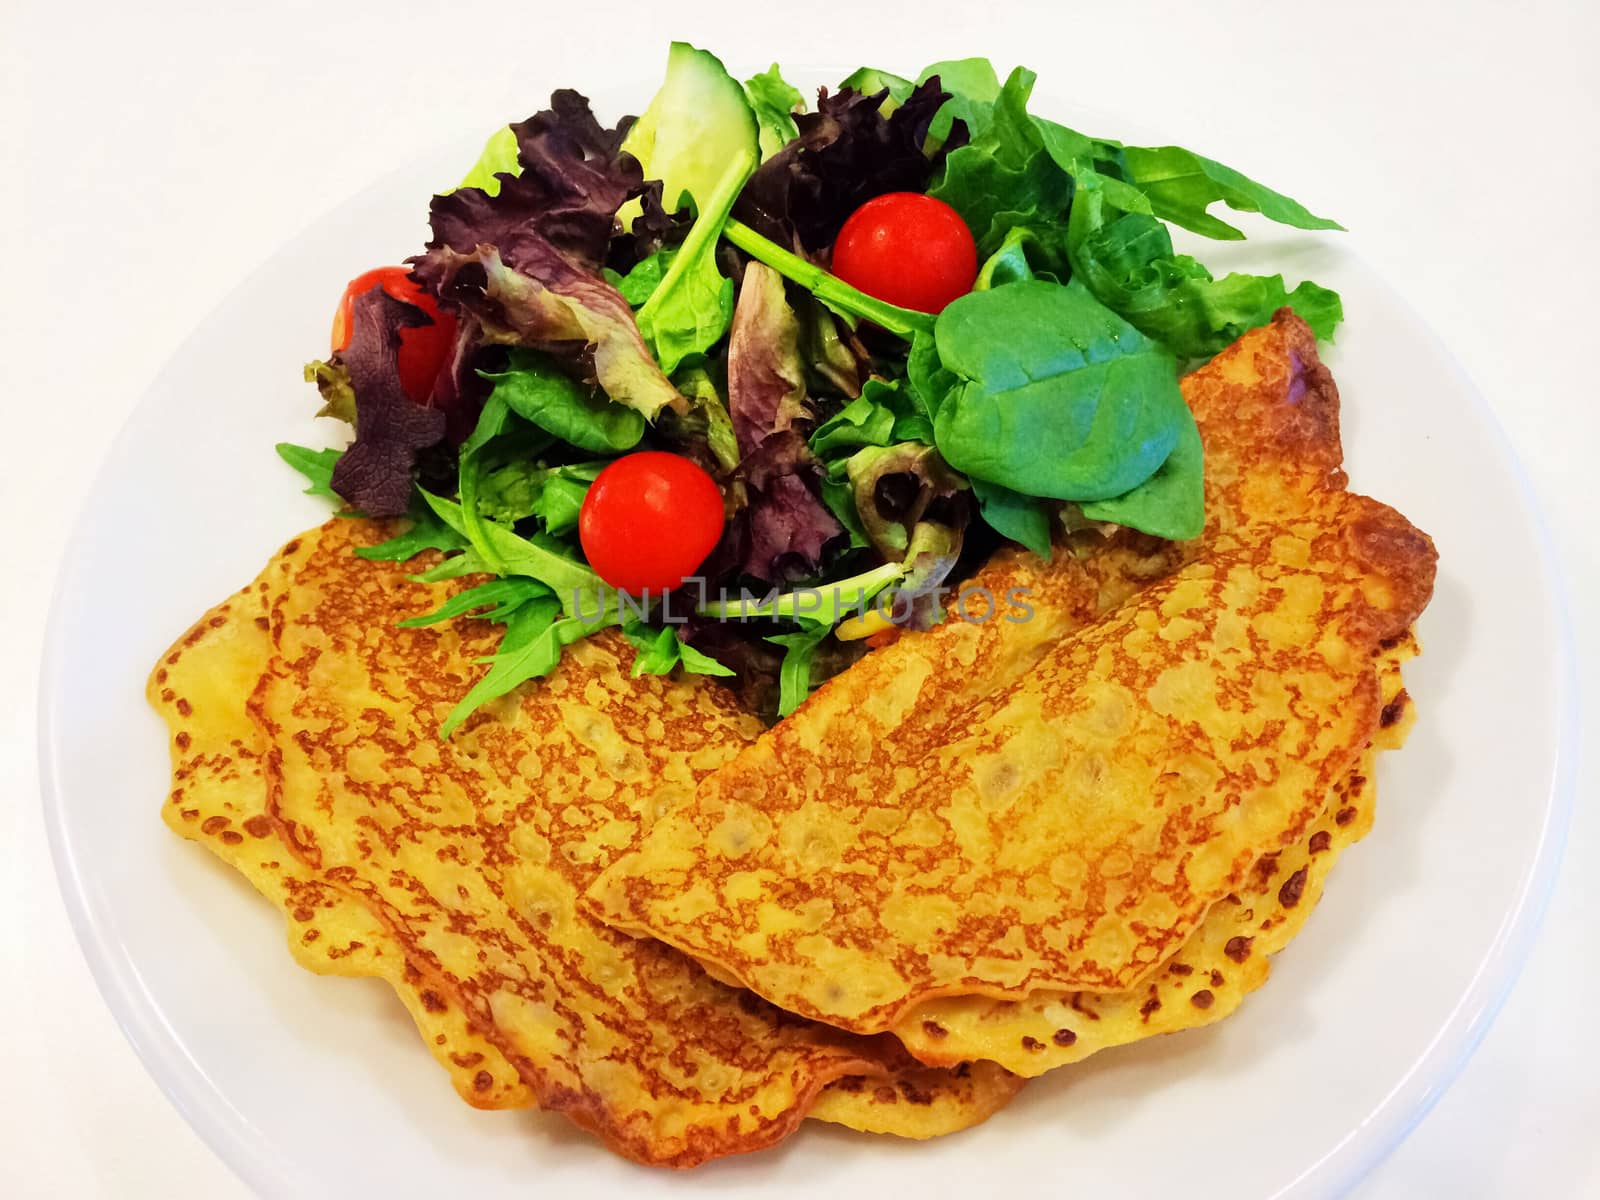 Pancakes and green salad, healthy and tasty food.